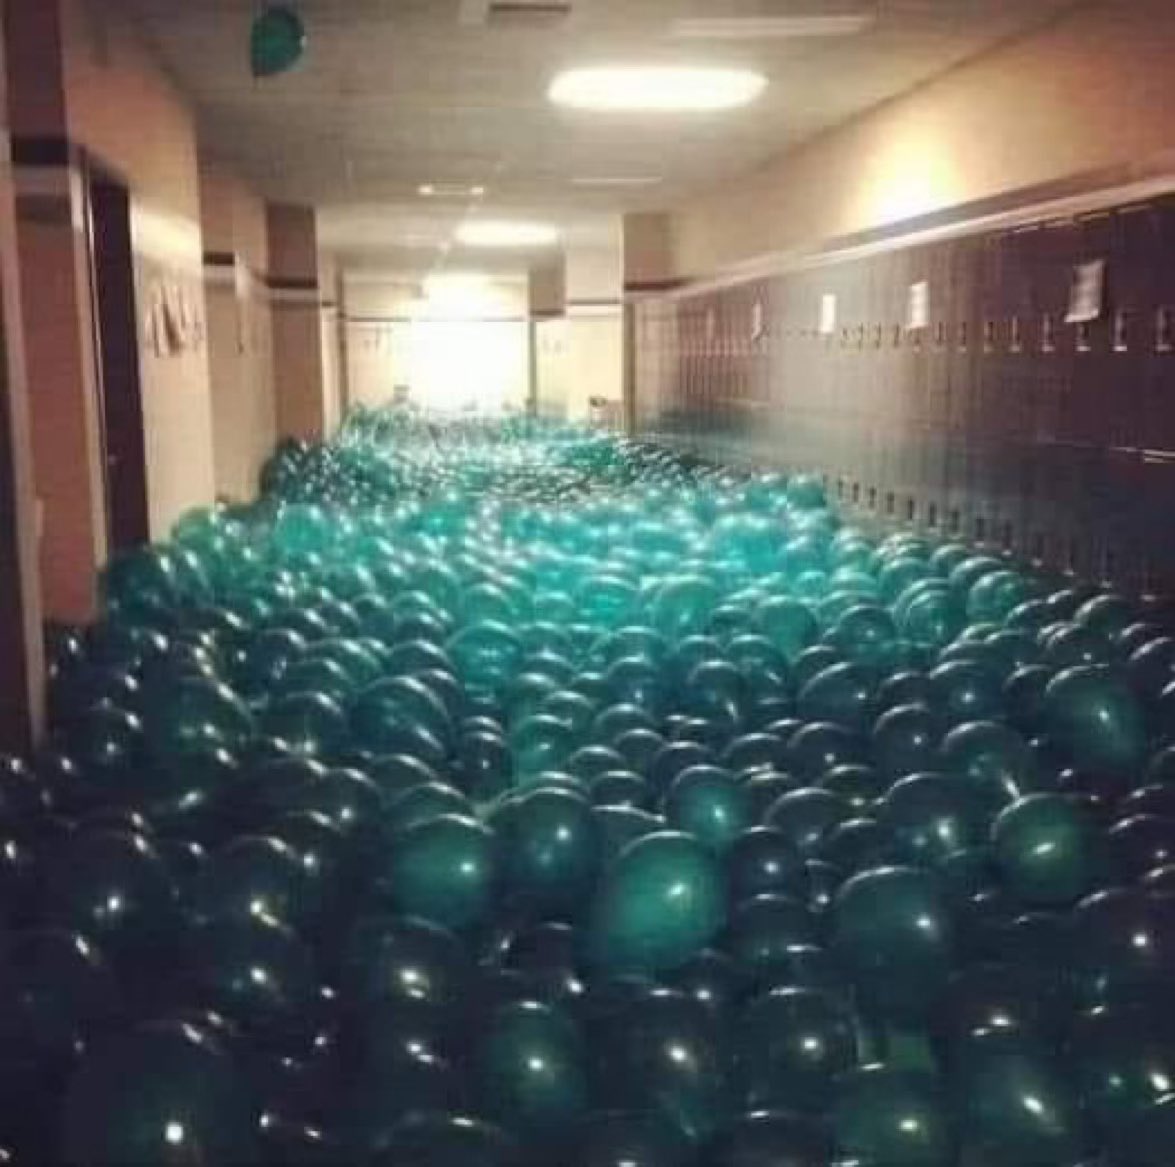 “A professor gave a balloon to every student, who had to inflate it, write their name on it and throw it in the hallway.  After the professor mixed all the balloons up, the students were given 5 minutes to find their own balloon.  Despite a hectic search, no one found their…